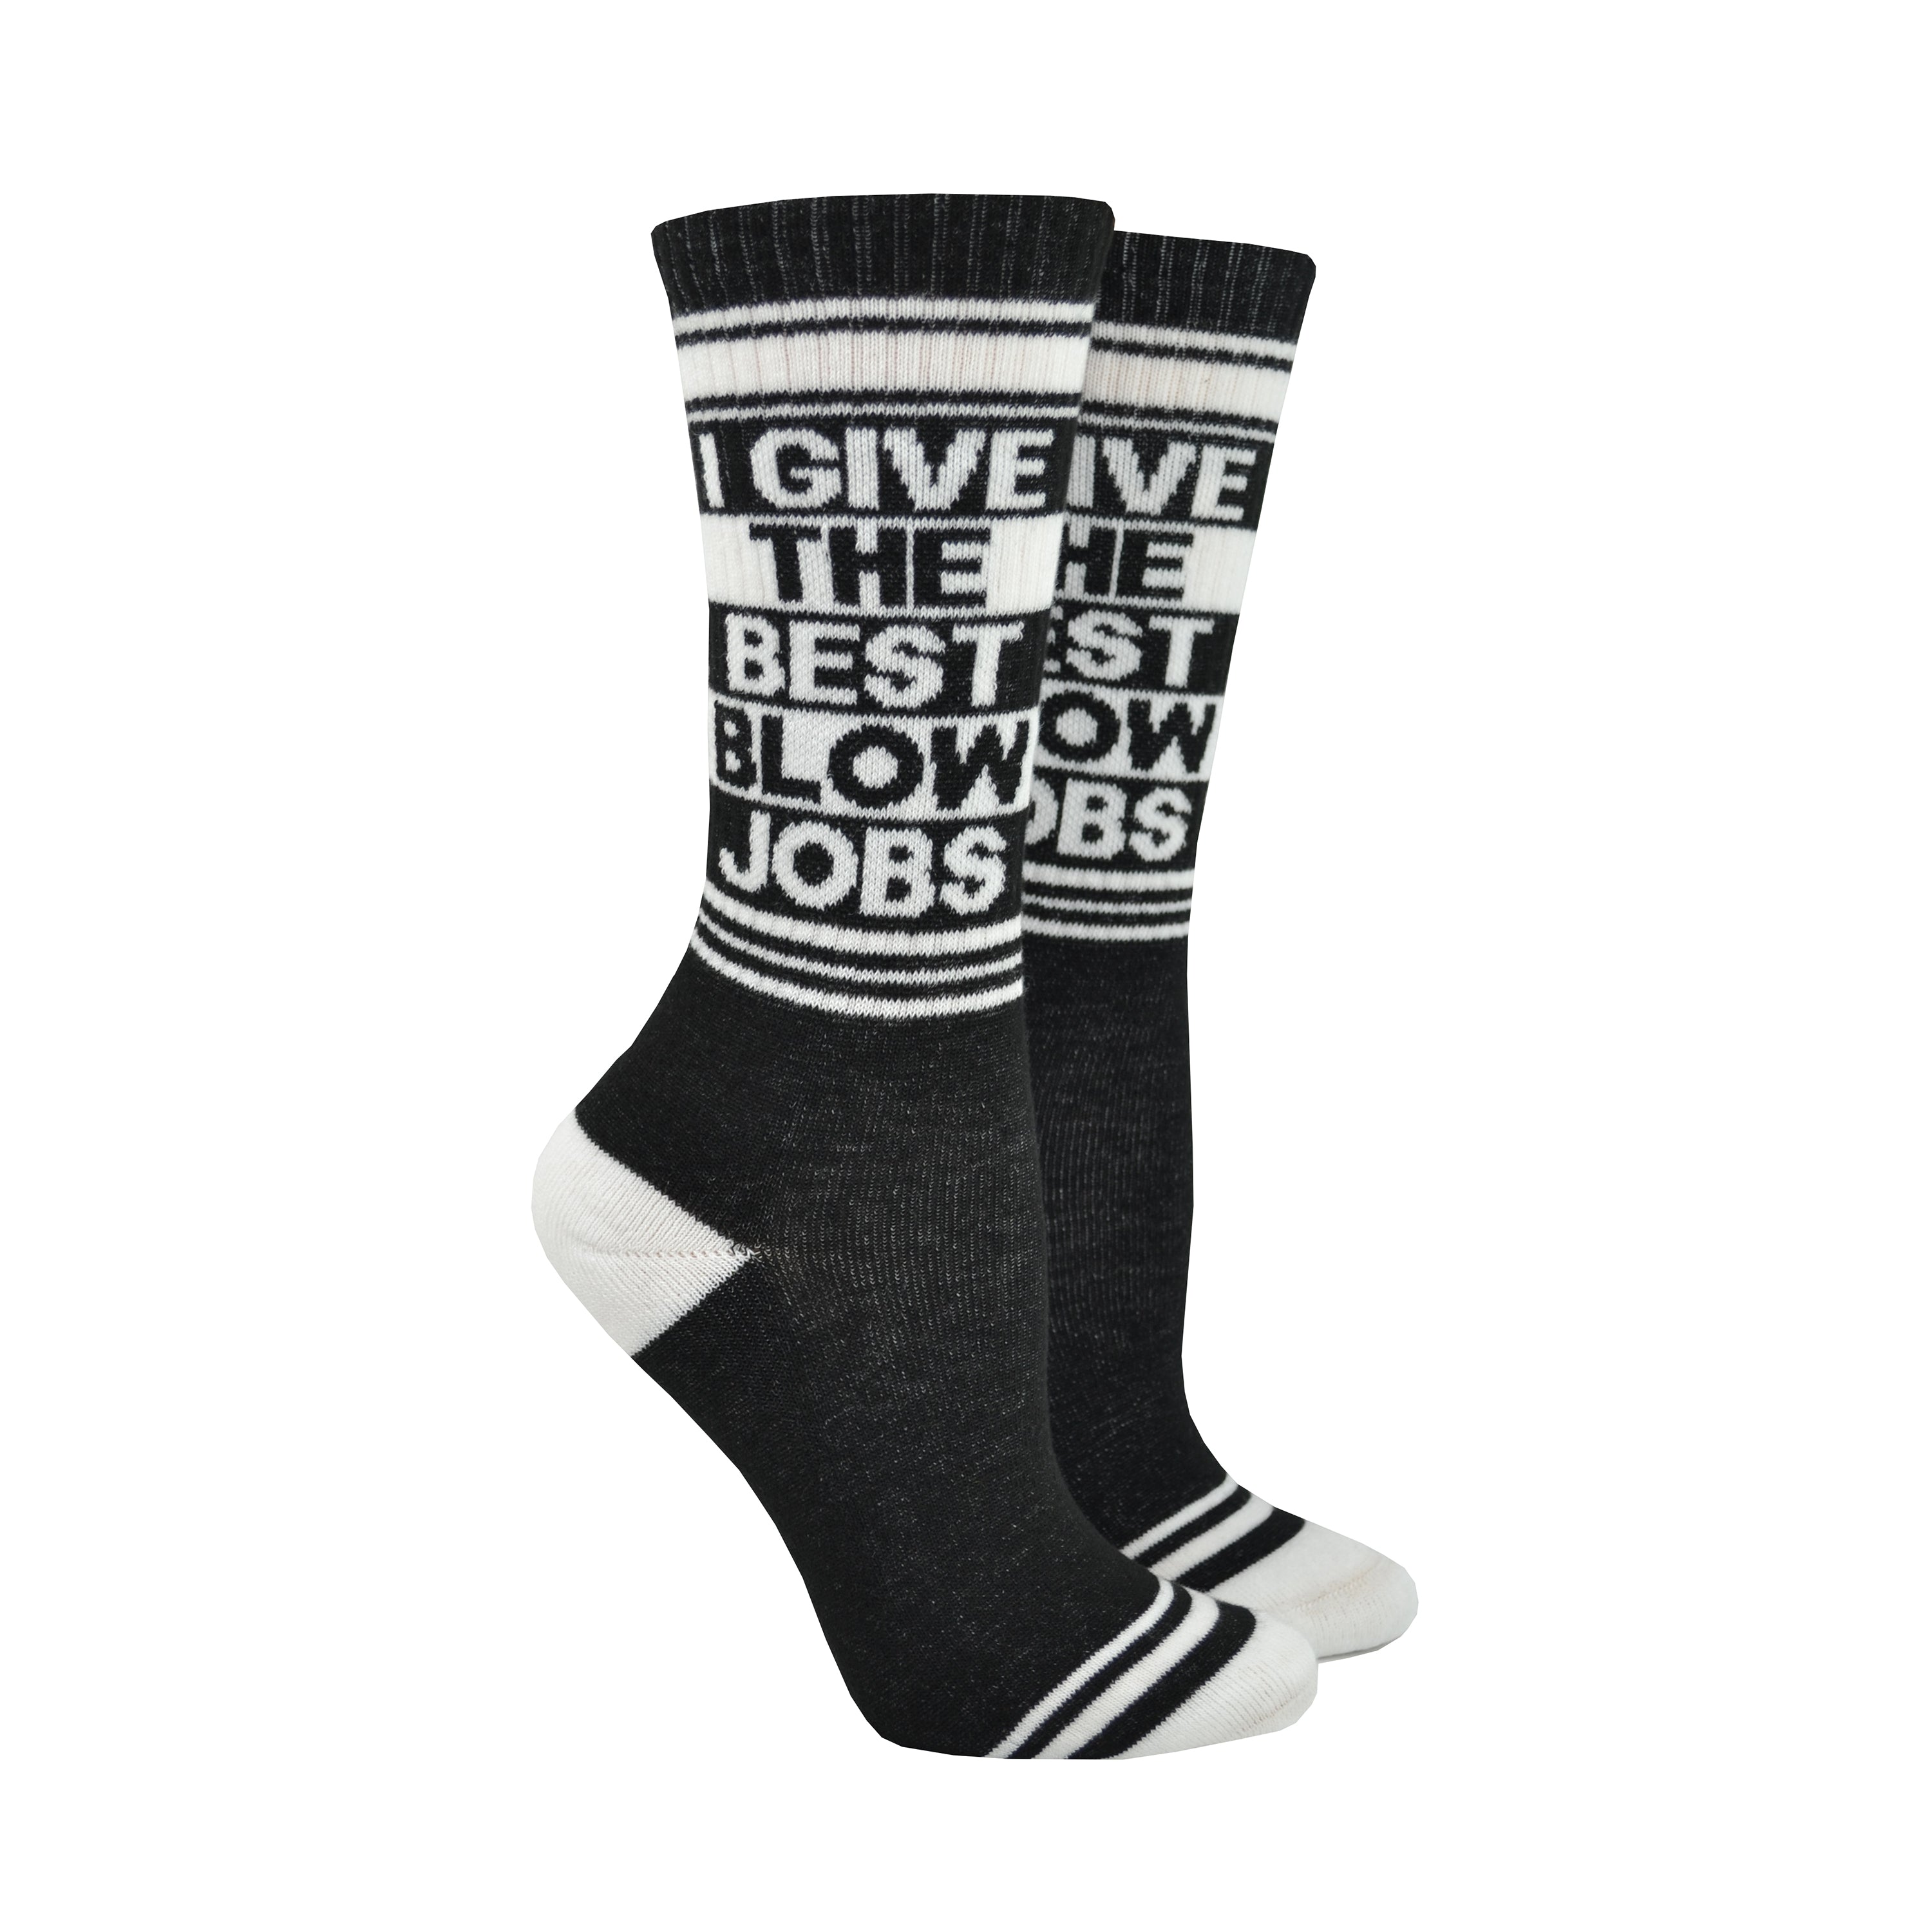 Shown on leg forms, a pair of black cotton Gumball Poodle brand unisex crew socks with white striped cuff/heel/toe. These socks feature the phrase, 